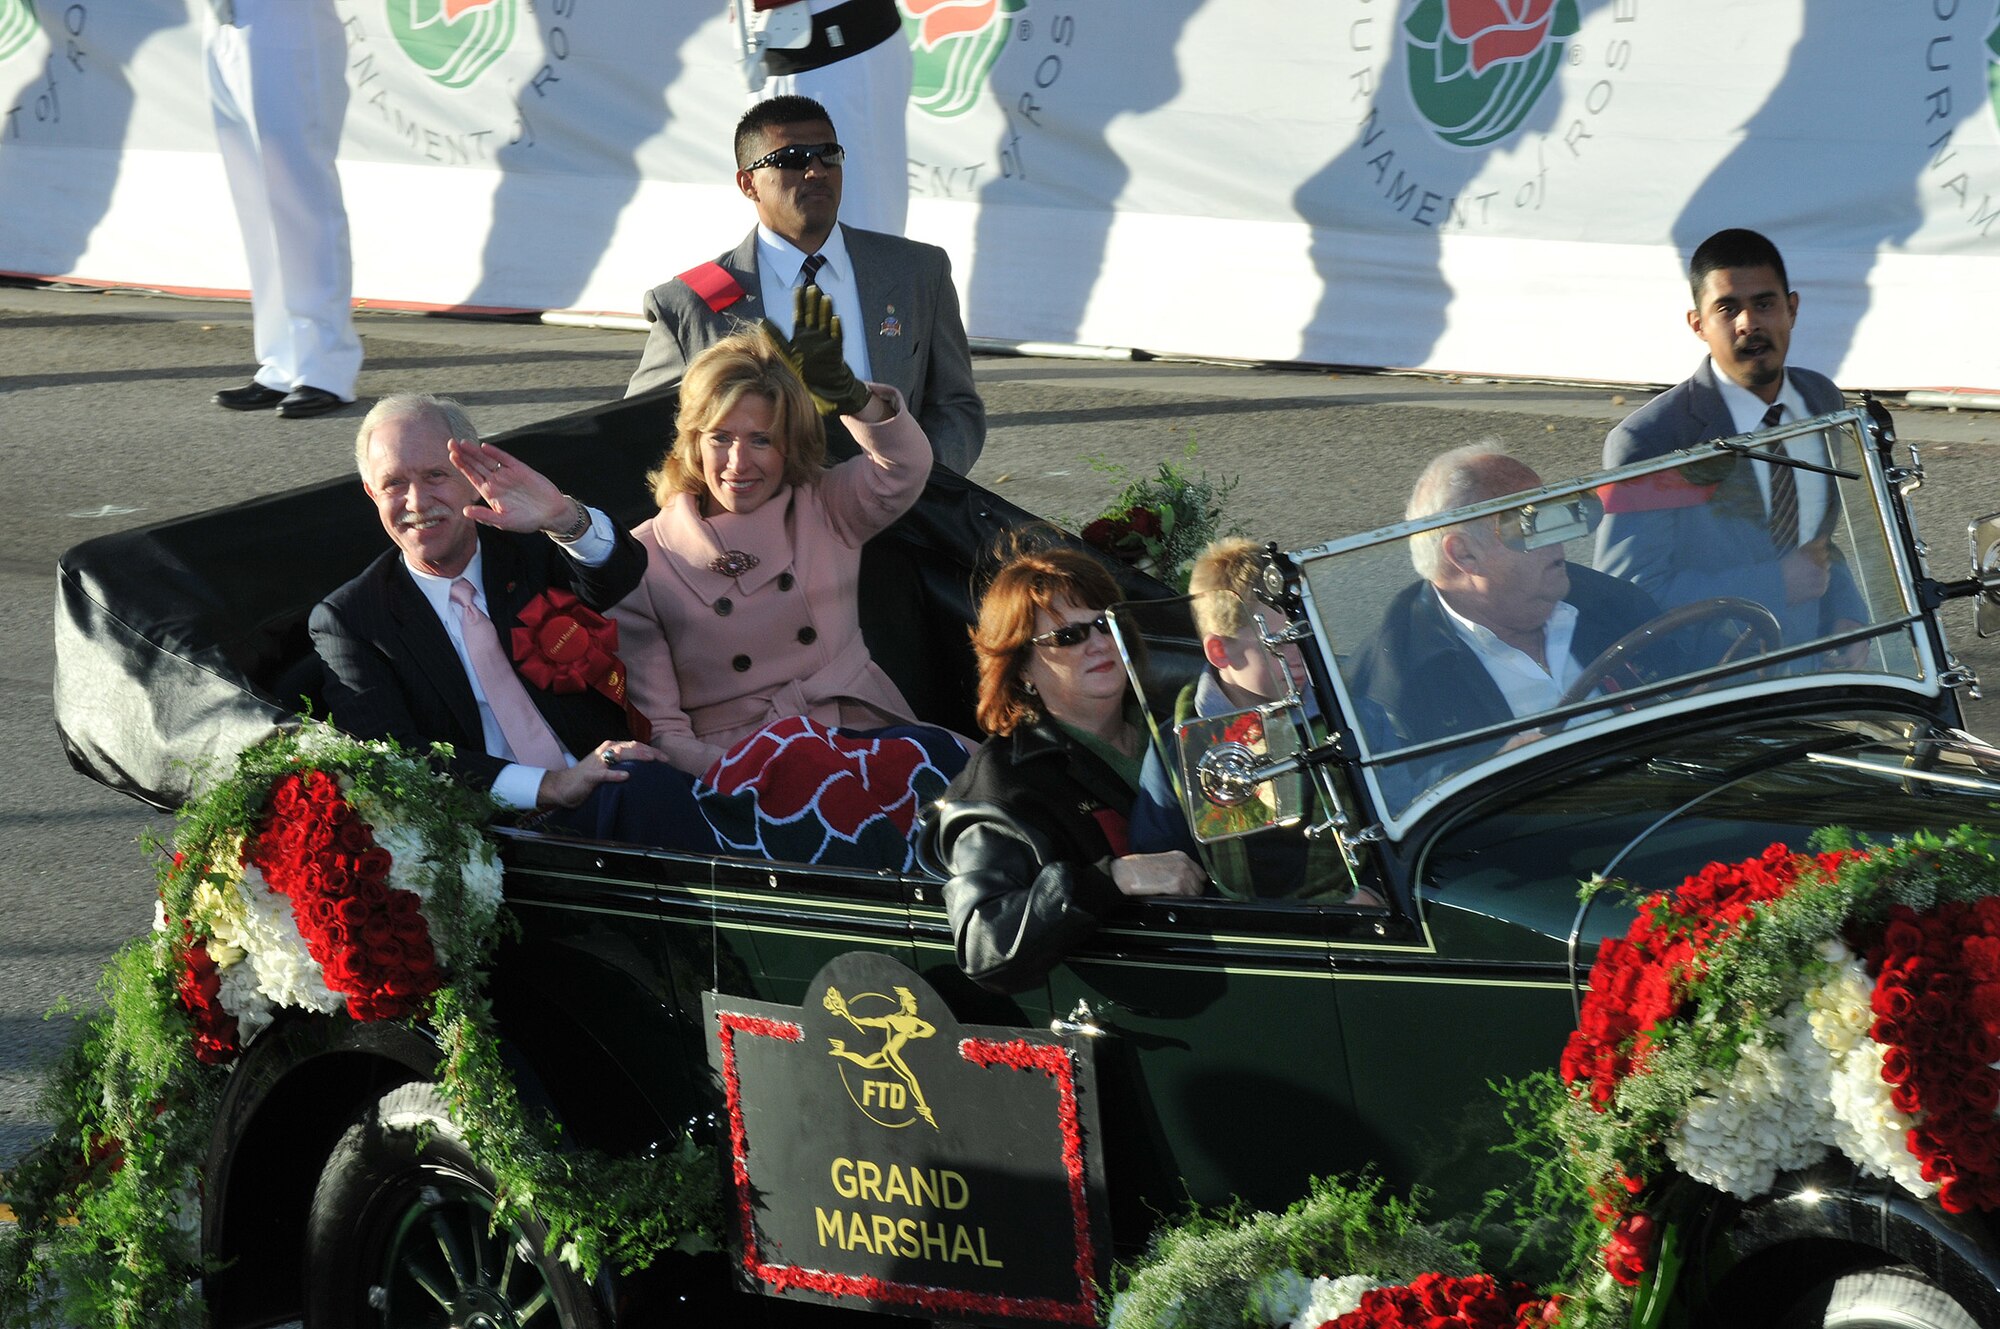 The year’s Grand Marshal Capt. Chesley B. "Sully" Sullenberger waves to the crowd during the Tournament of Rose Parade, Jan 1. The US Airways pilot was honored for saving the lives of everyone aboard an Airbus A320 during an emergency landing on the Hudson River. (Photo by Atiba S. Copeland)